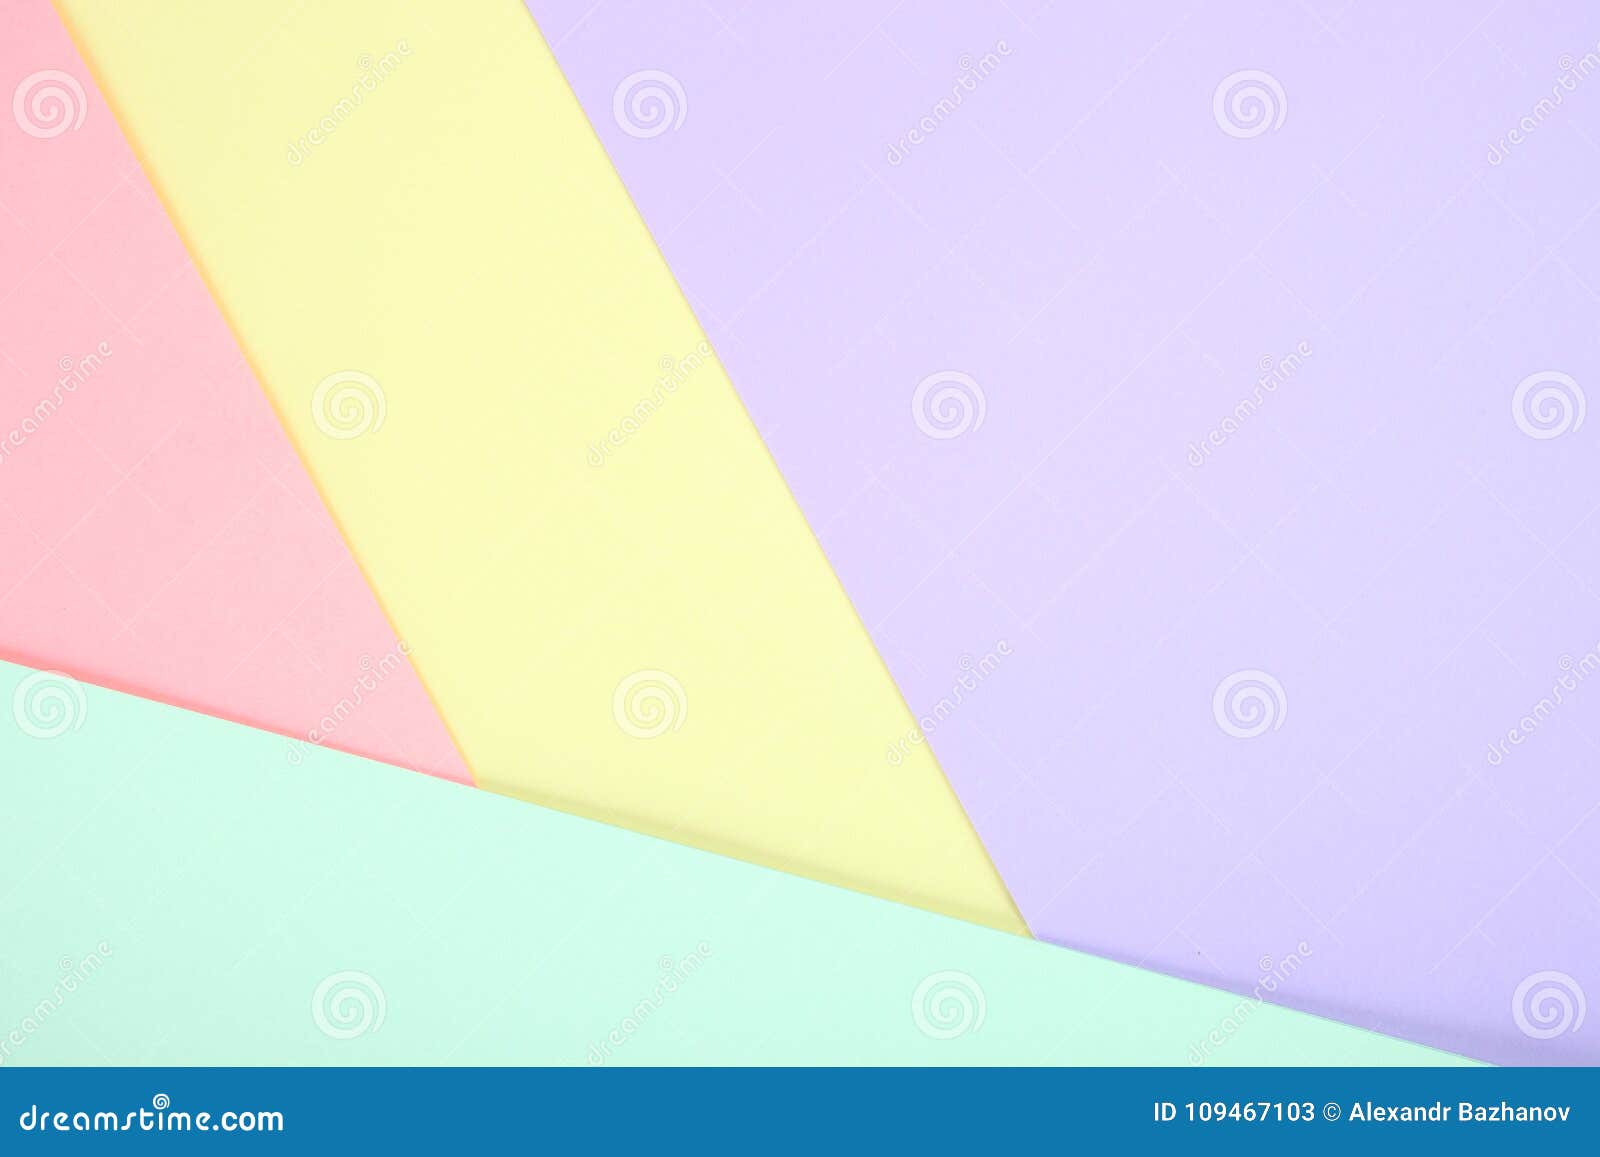 Pastel colored paper stock image. Image of soft, texture - 109467103